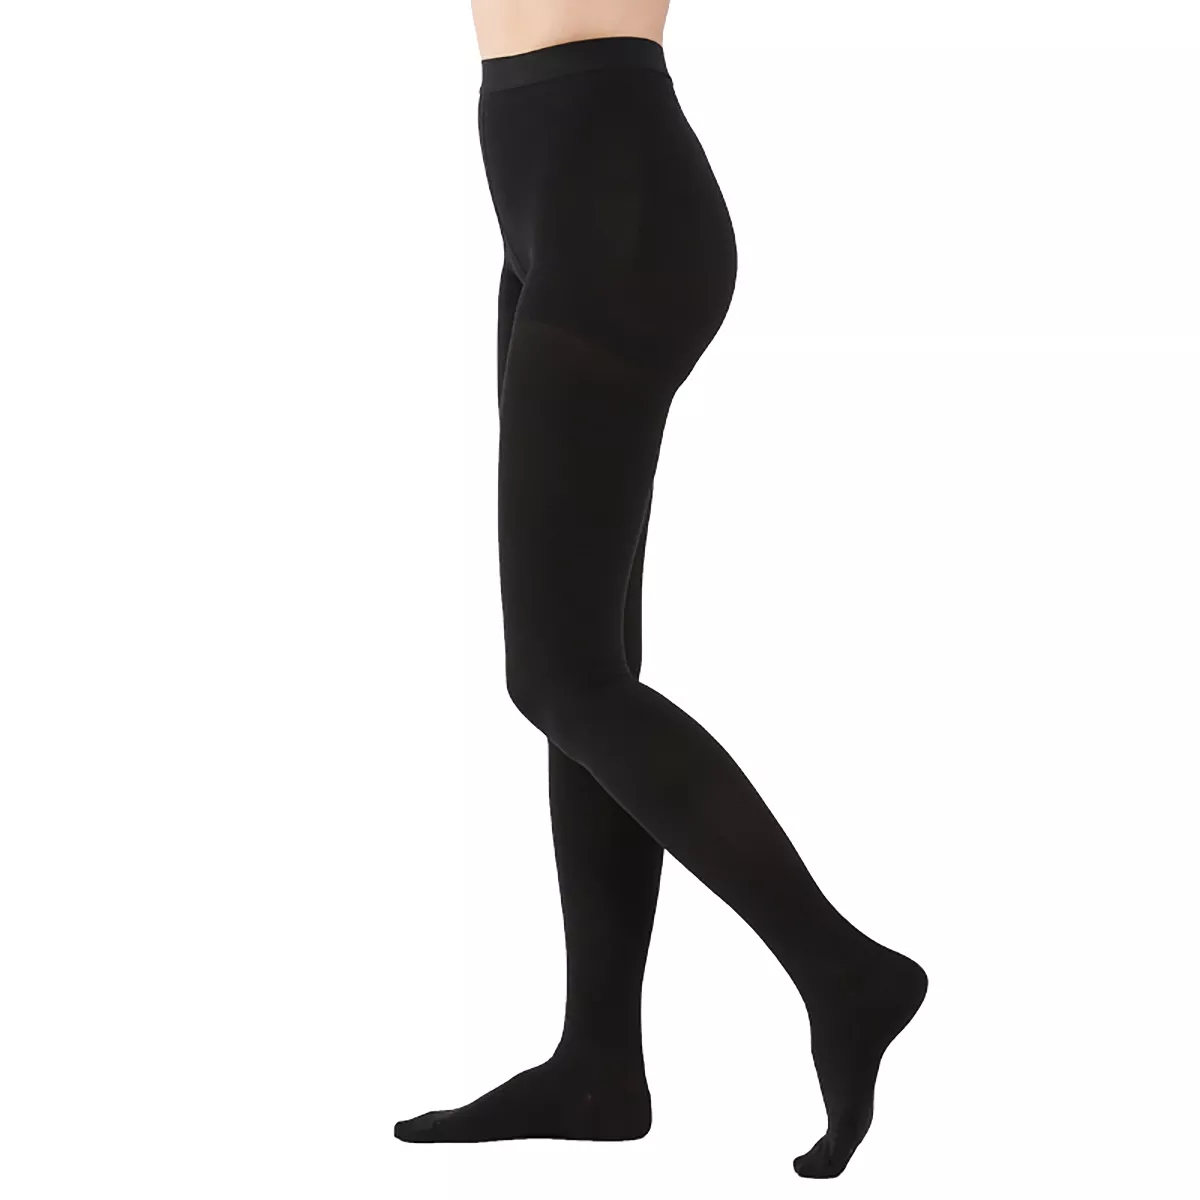 Fertile Mind SoftTights – Microfiber Maternity Tights | Free Shipping